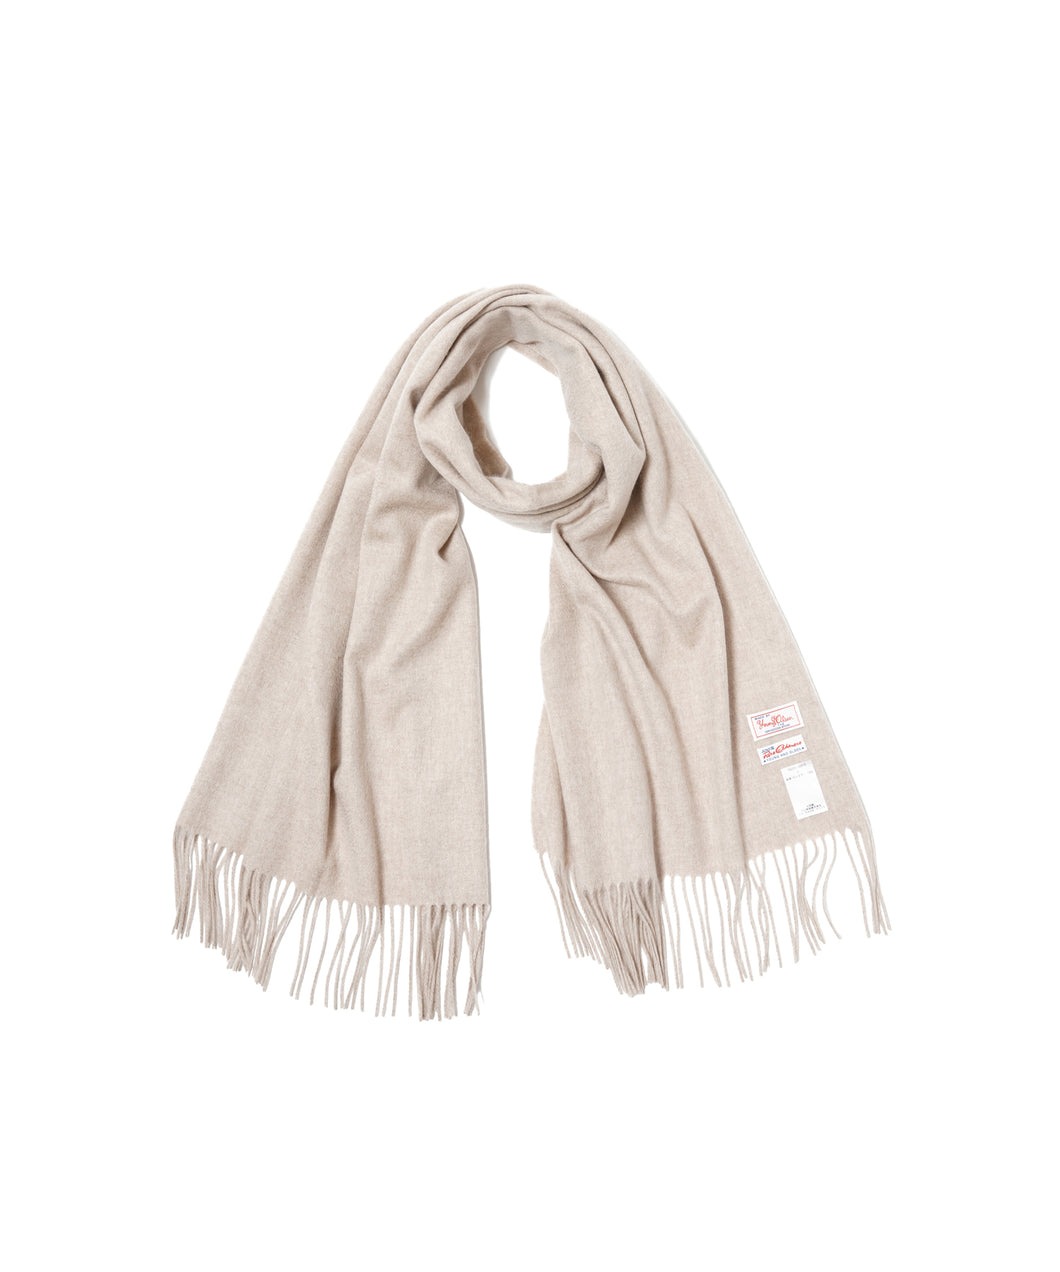 【MEN , WOMEN】YOUNG & OLSEN TDS YOUNG'S BEST CASHMERE SCARF